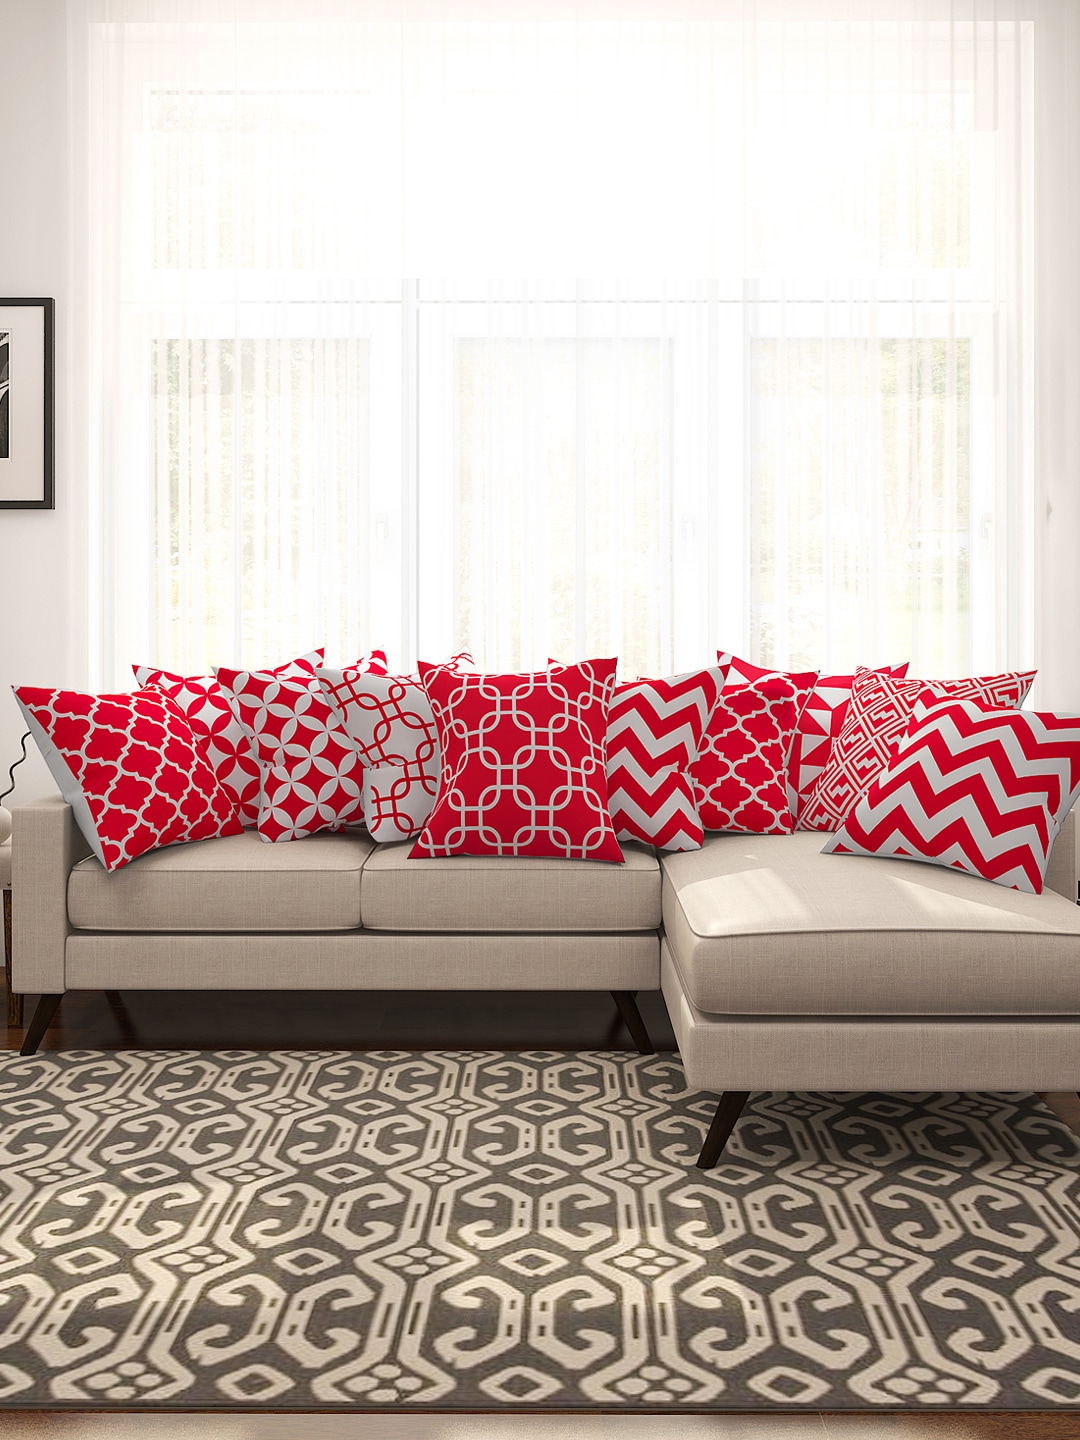 SEJ by Nisha Gupta Red & White Set of 10 Printed 16'' x 16'' Square Cushion Covers Price in India